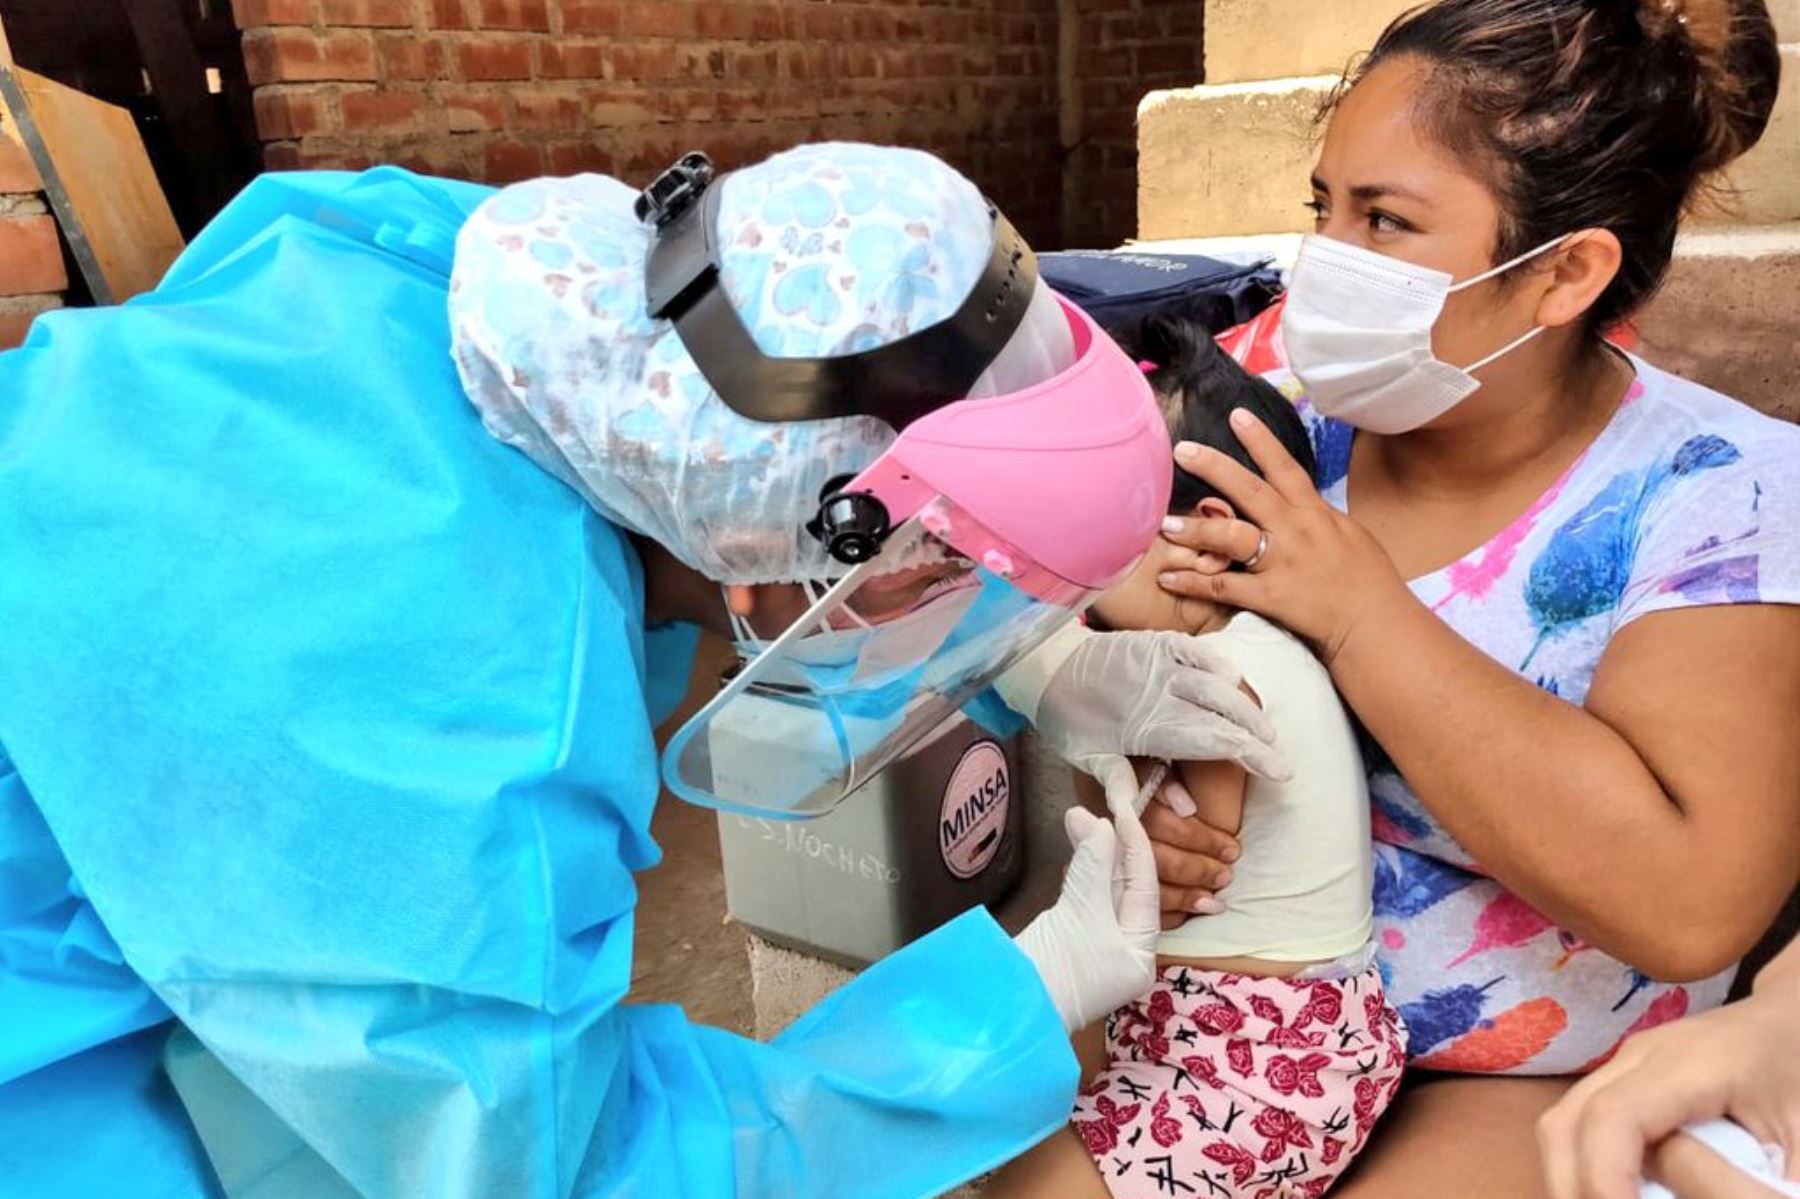 Peru has reported two deaths from diphtheria, and the government has issued a national epidemiological alert